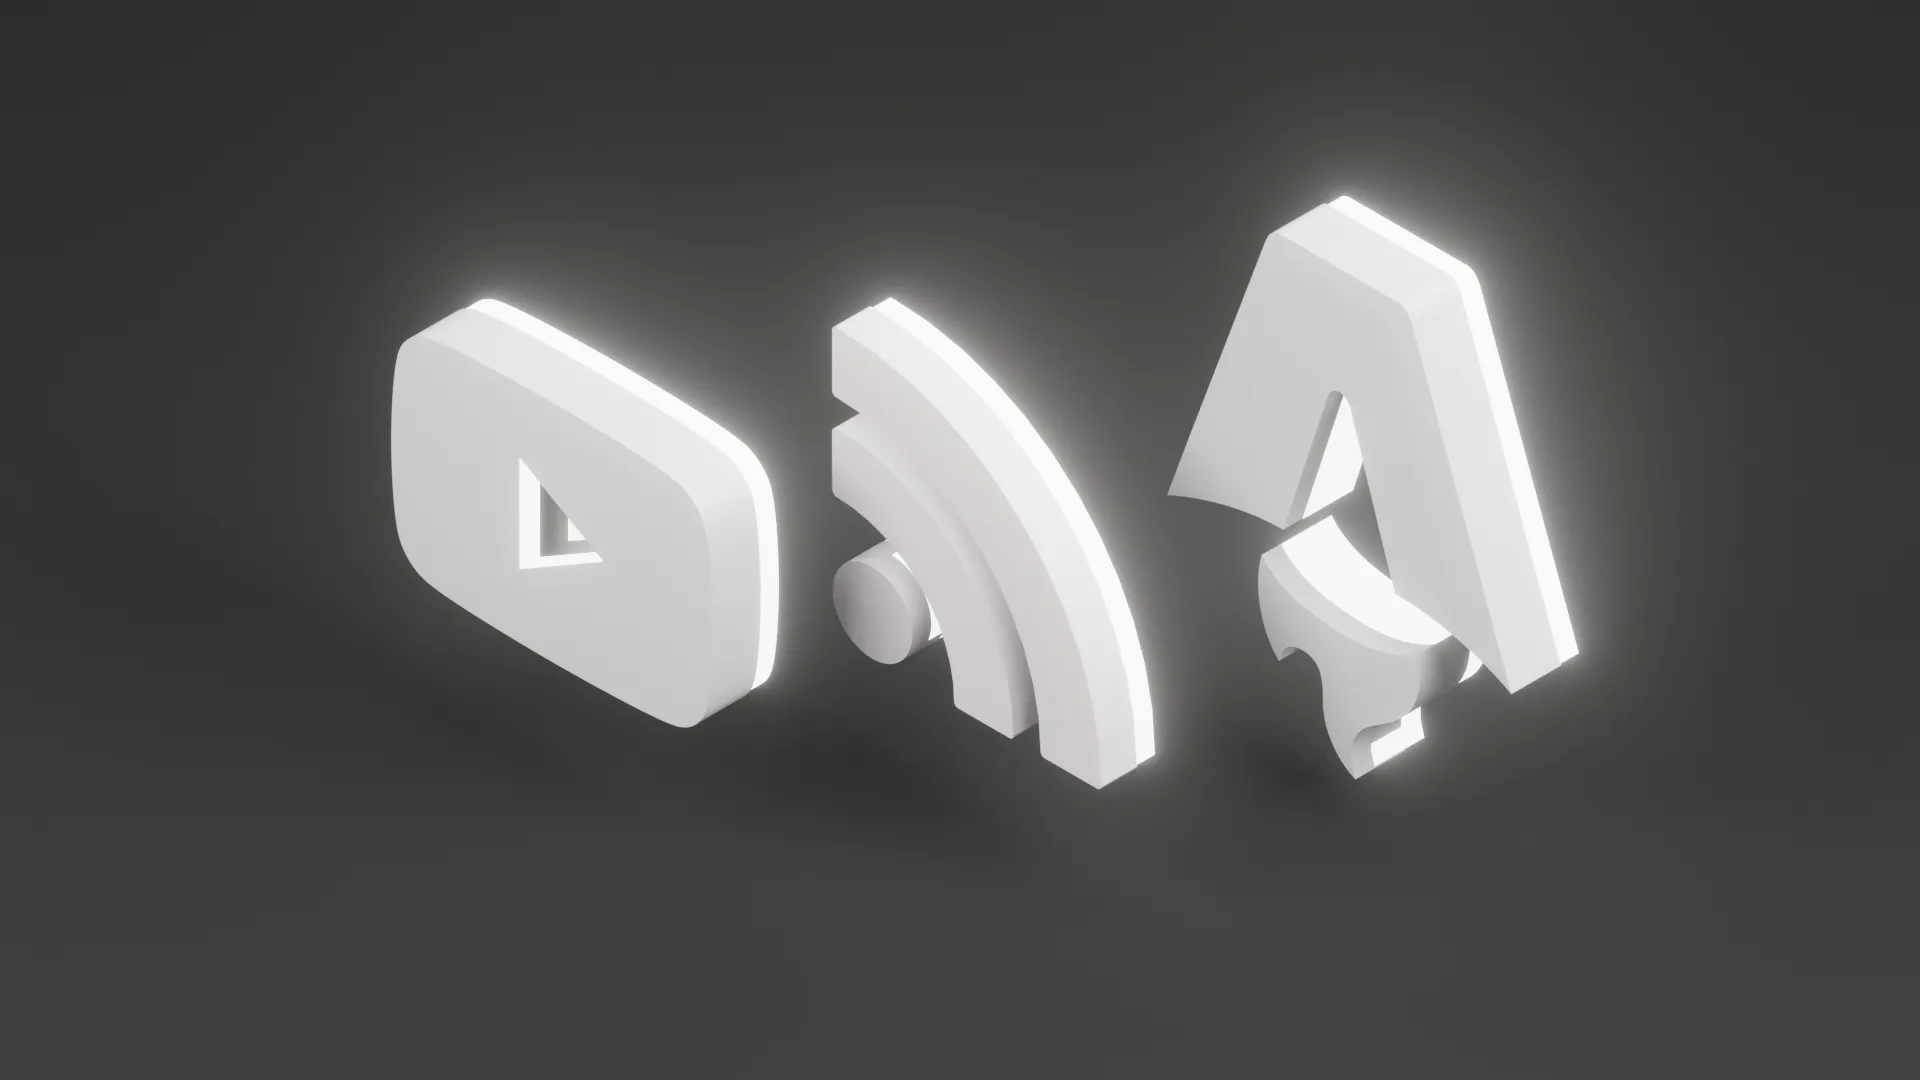 A low poly rendering of the RSS, YouTube, and Astro logos.